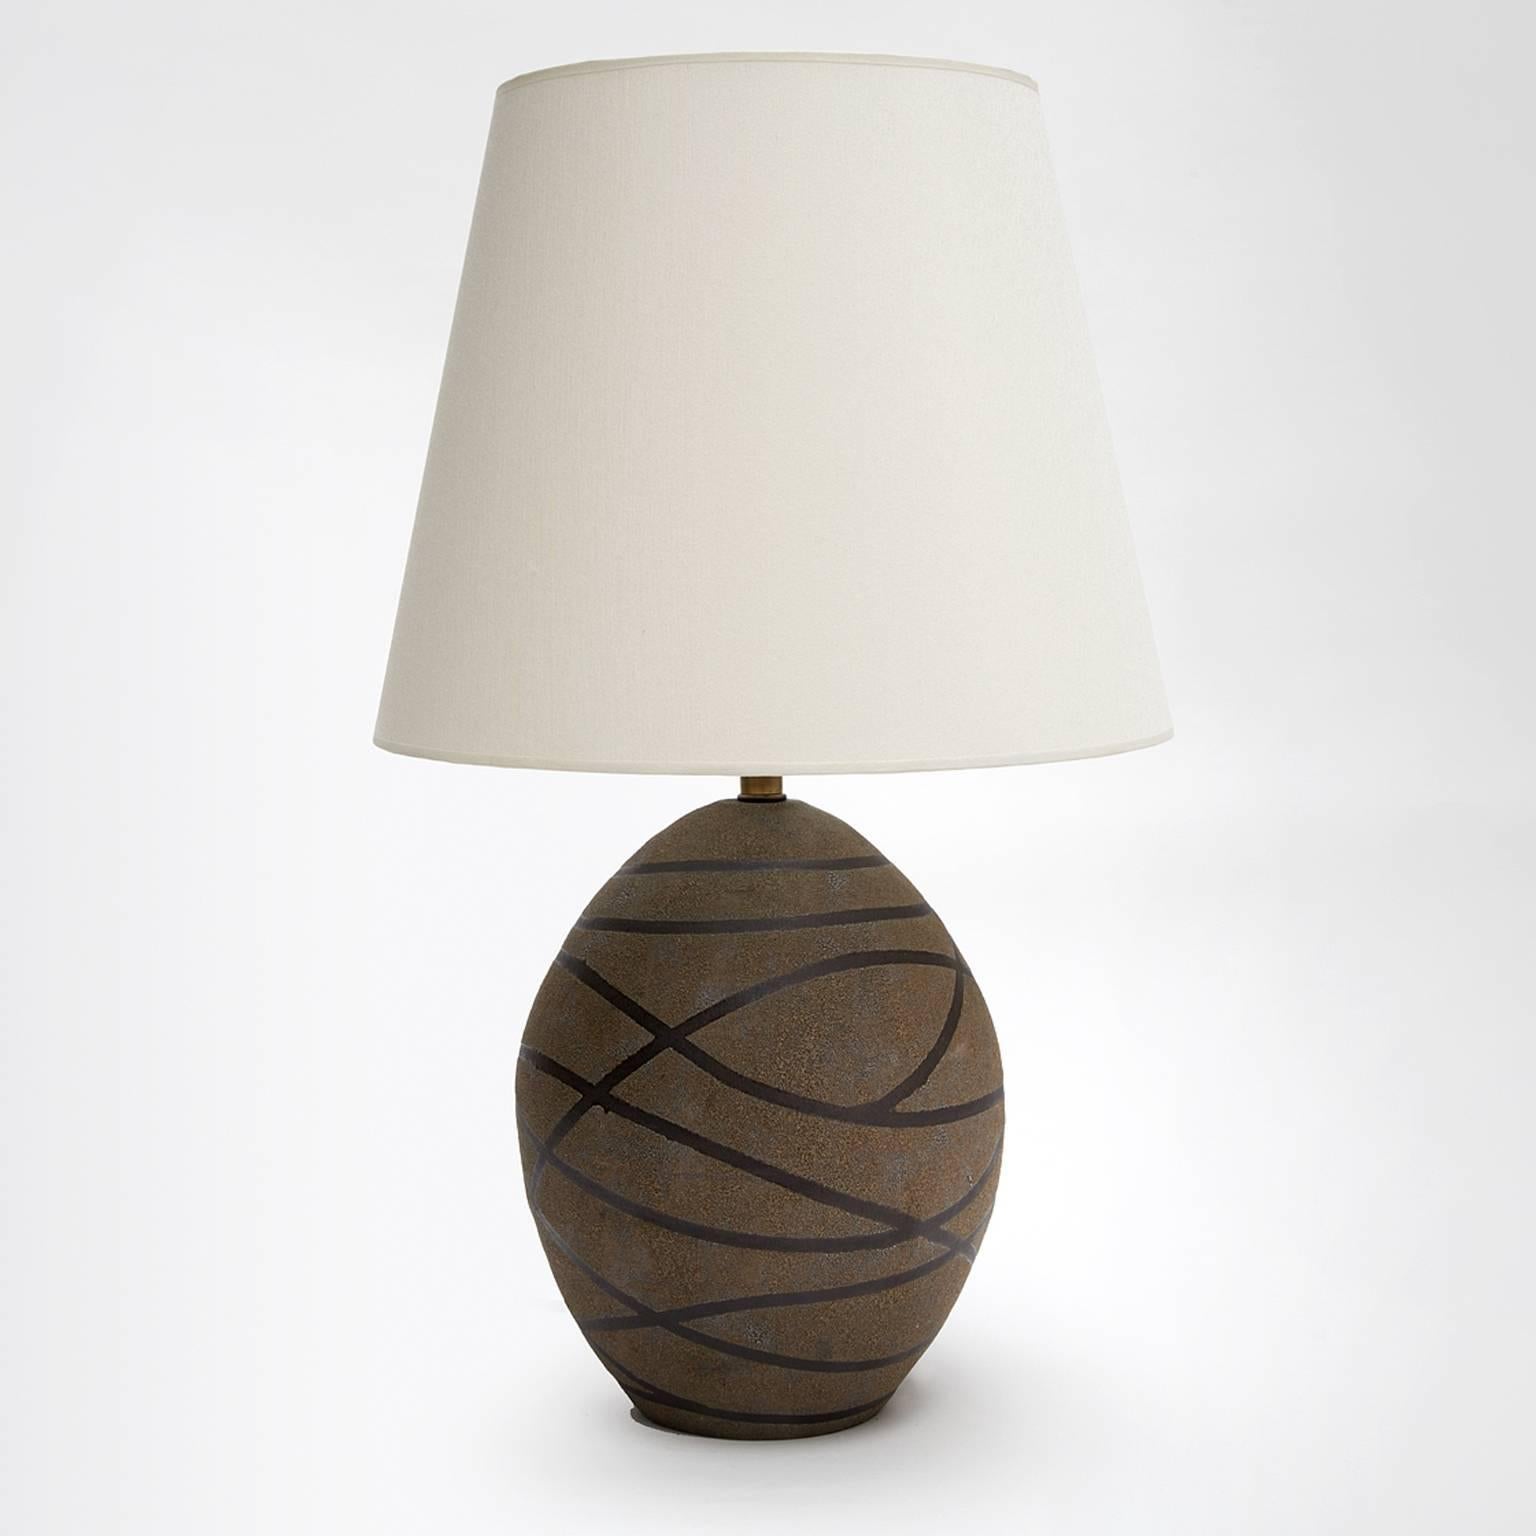 Black stripes ceramic glazed matte texture oval table lamp.
Unique.
Ceramic.
Industrial hand built.
Made in New York city.
Available at trans-LUXE.
Measurements: OAH 2'-0" F.
Table Lamp Base: 12" H x 9" W. 
Depth 16"